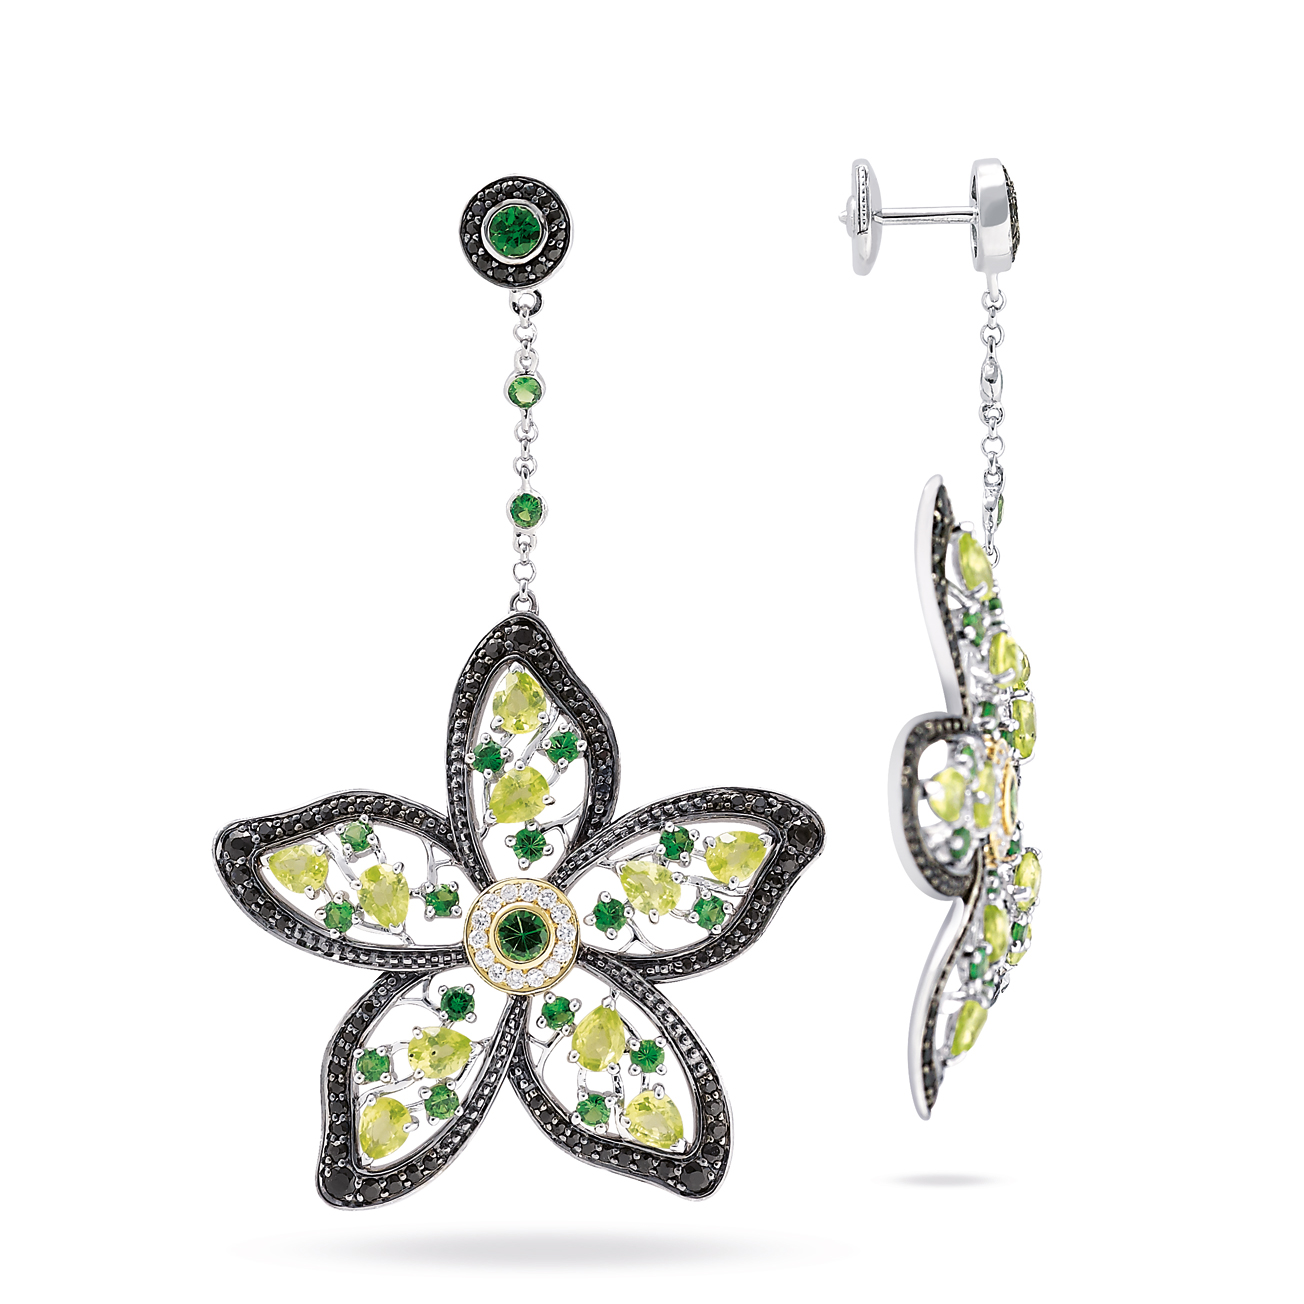 PAPILLON EARRINGS WITH PERIDOTS, TSAVORITE, BLACK SAPPHIRES AND DIAMONDS BY MOUAWAD